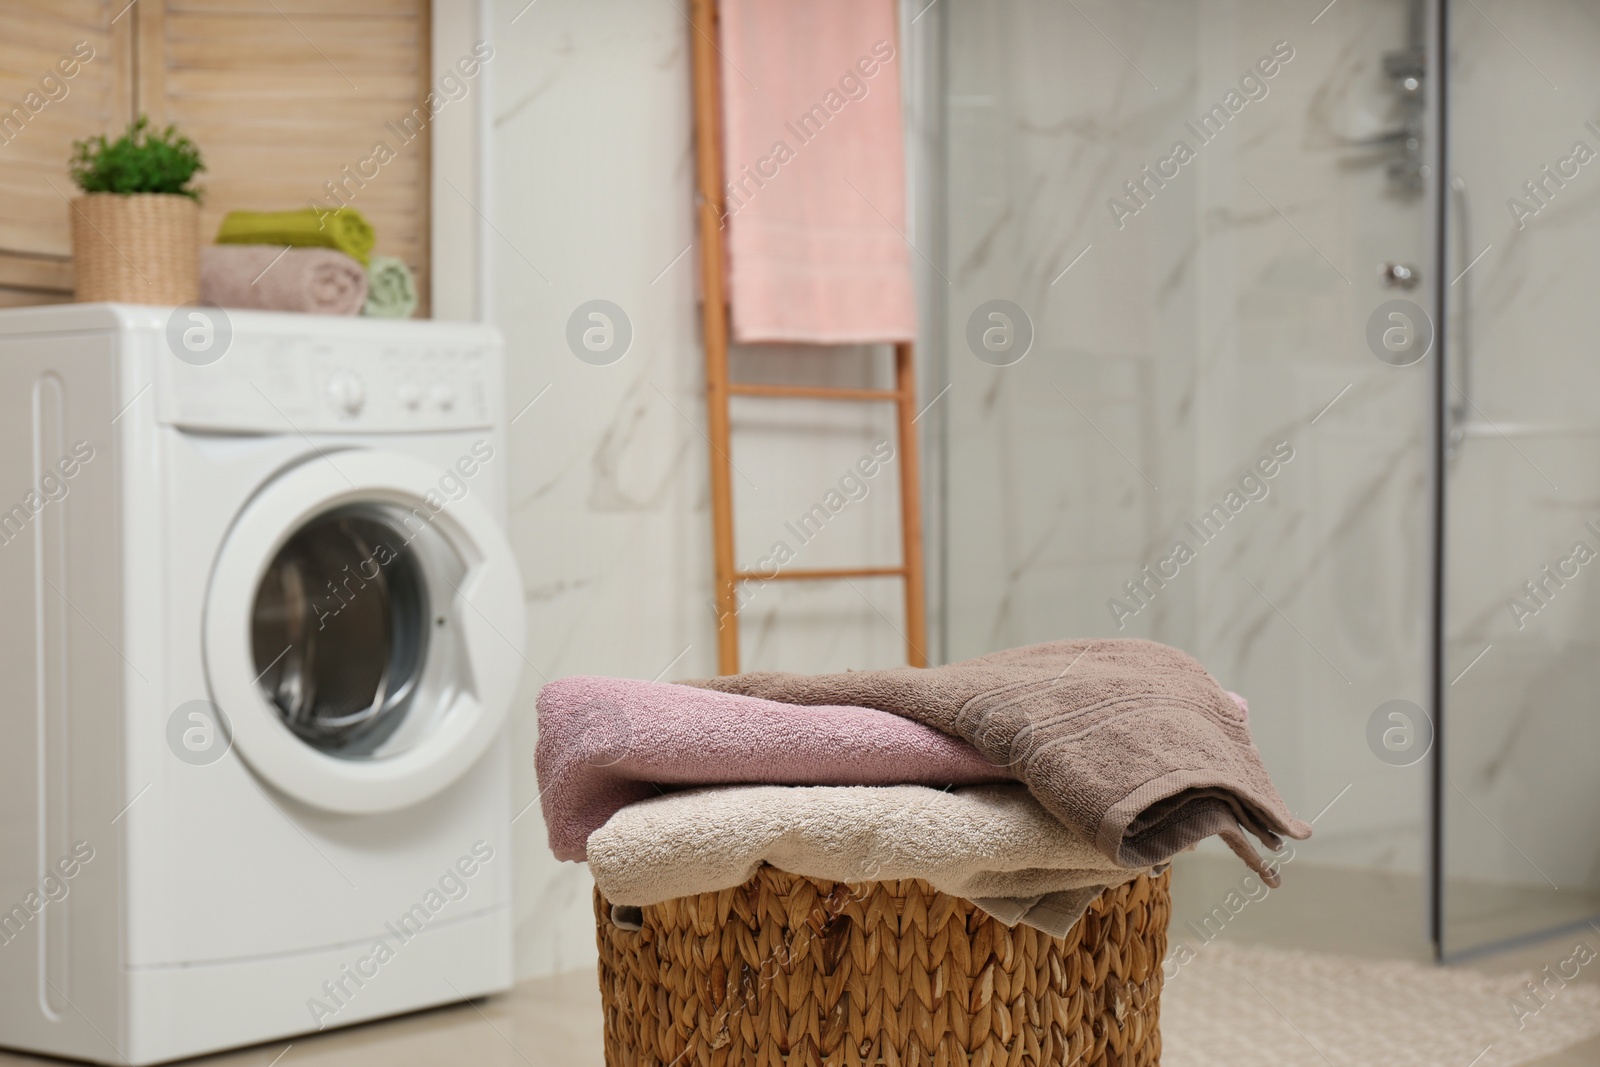 Photo of Wicker basket with laundry and washing machine in bathroom